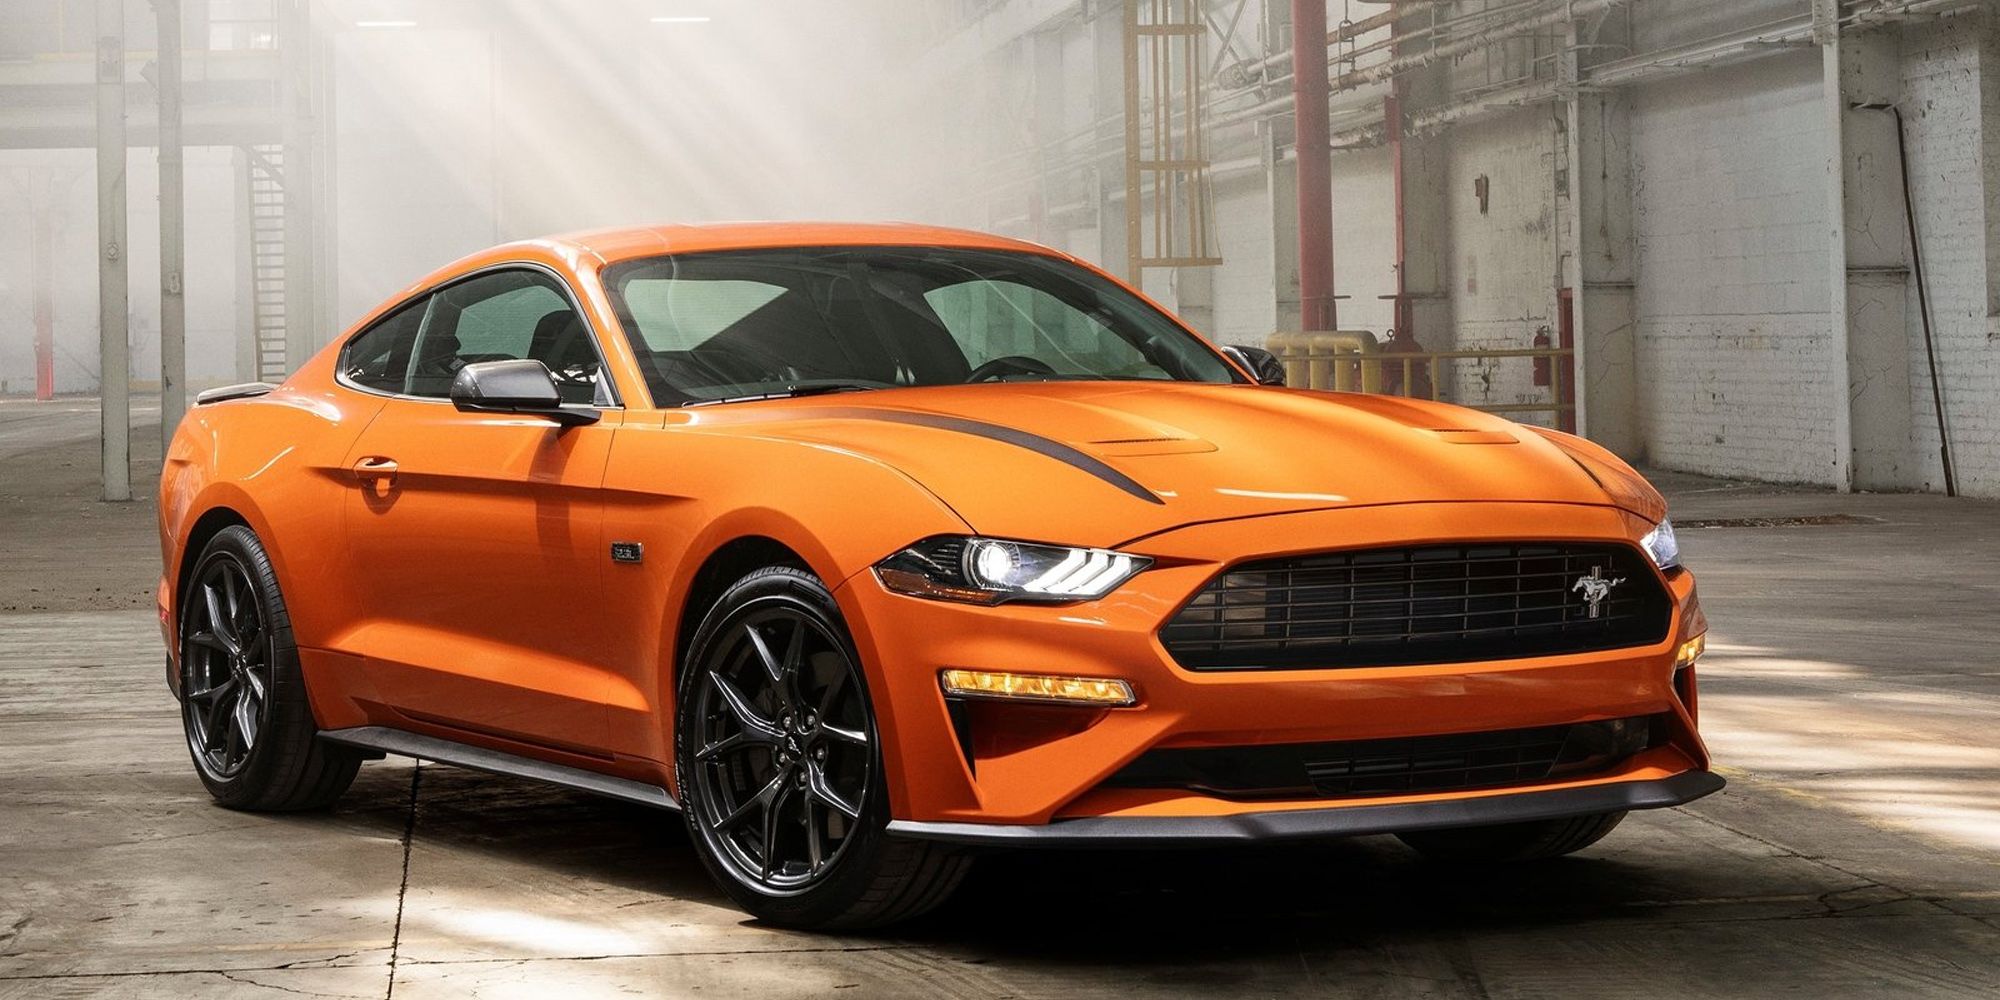 The front of the Mustang EcoBoost